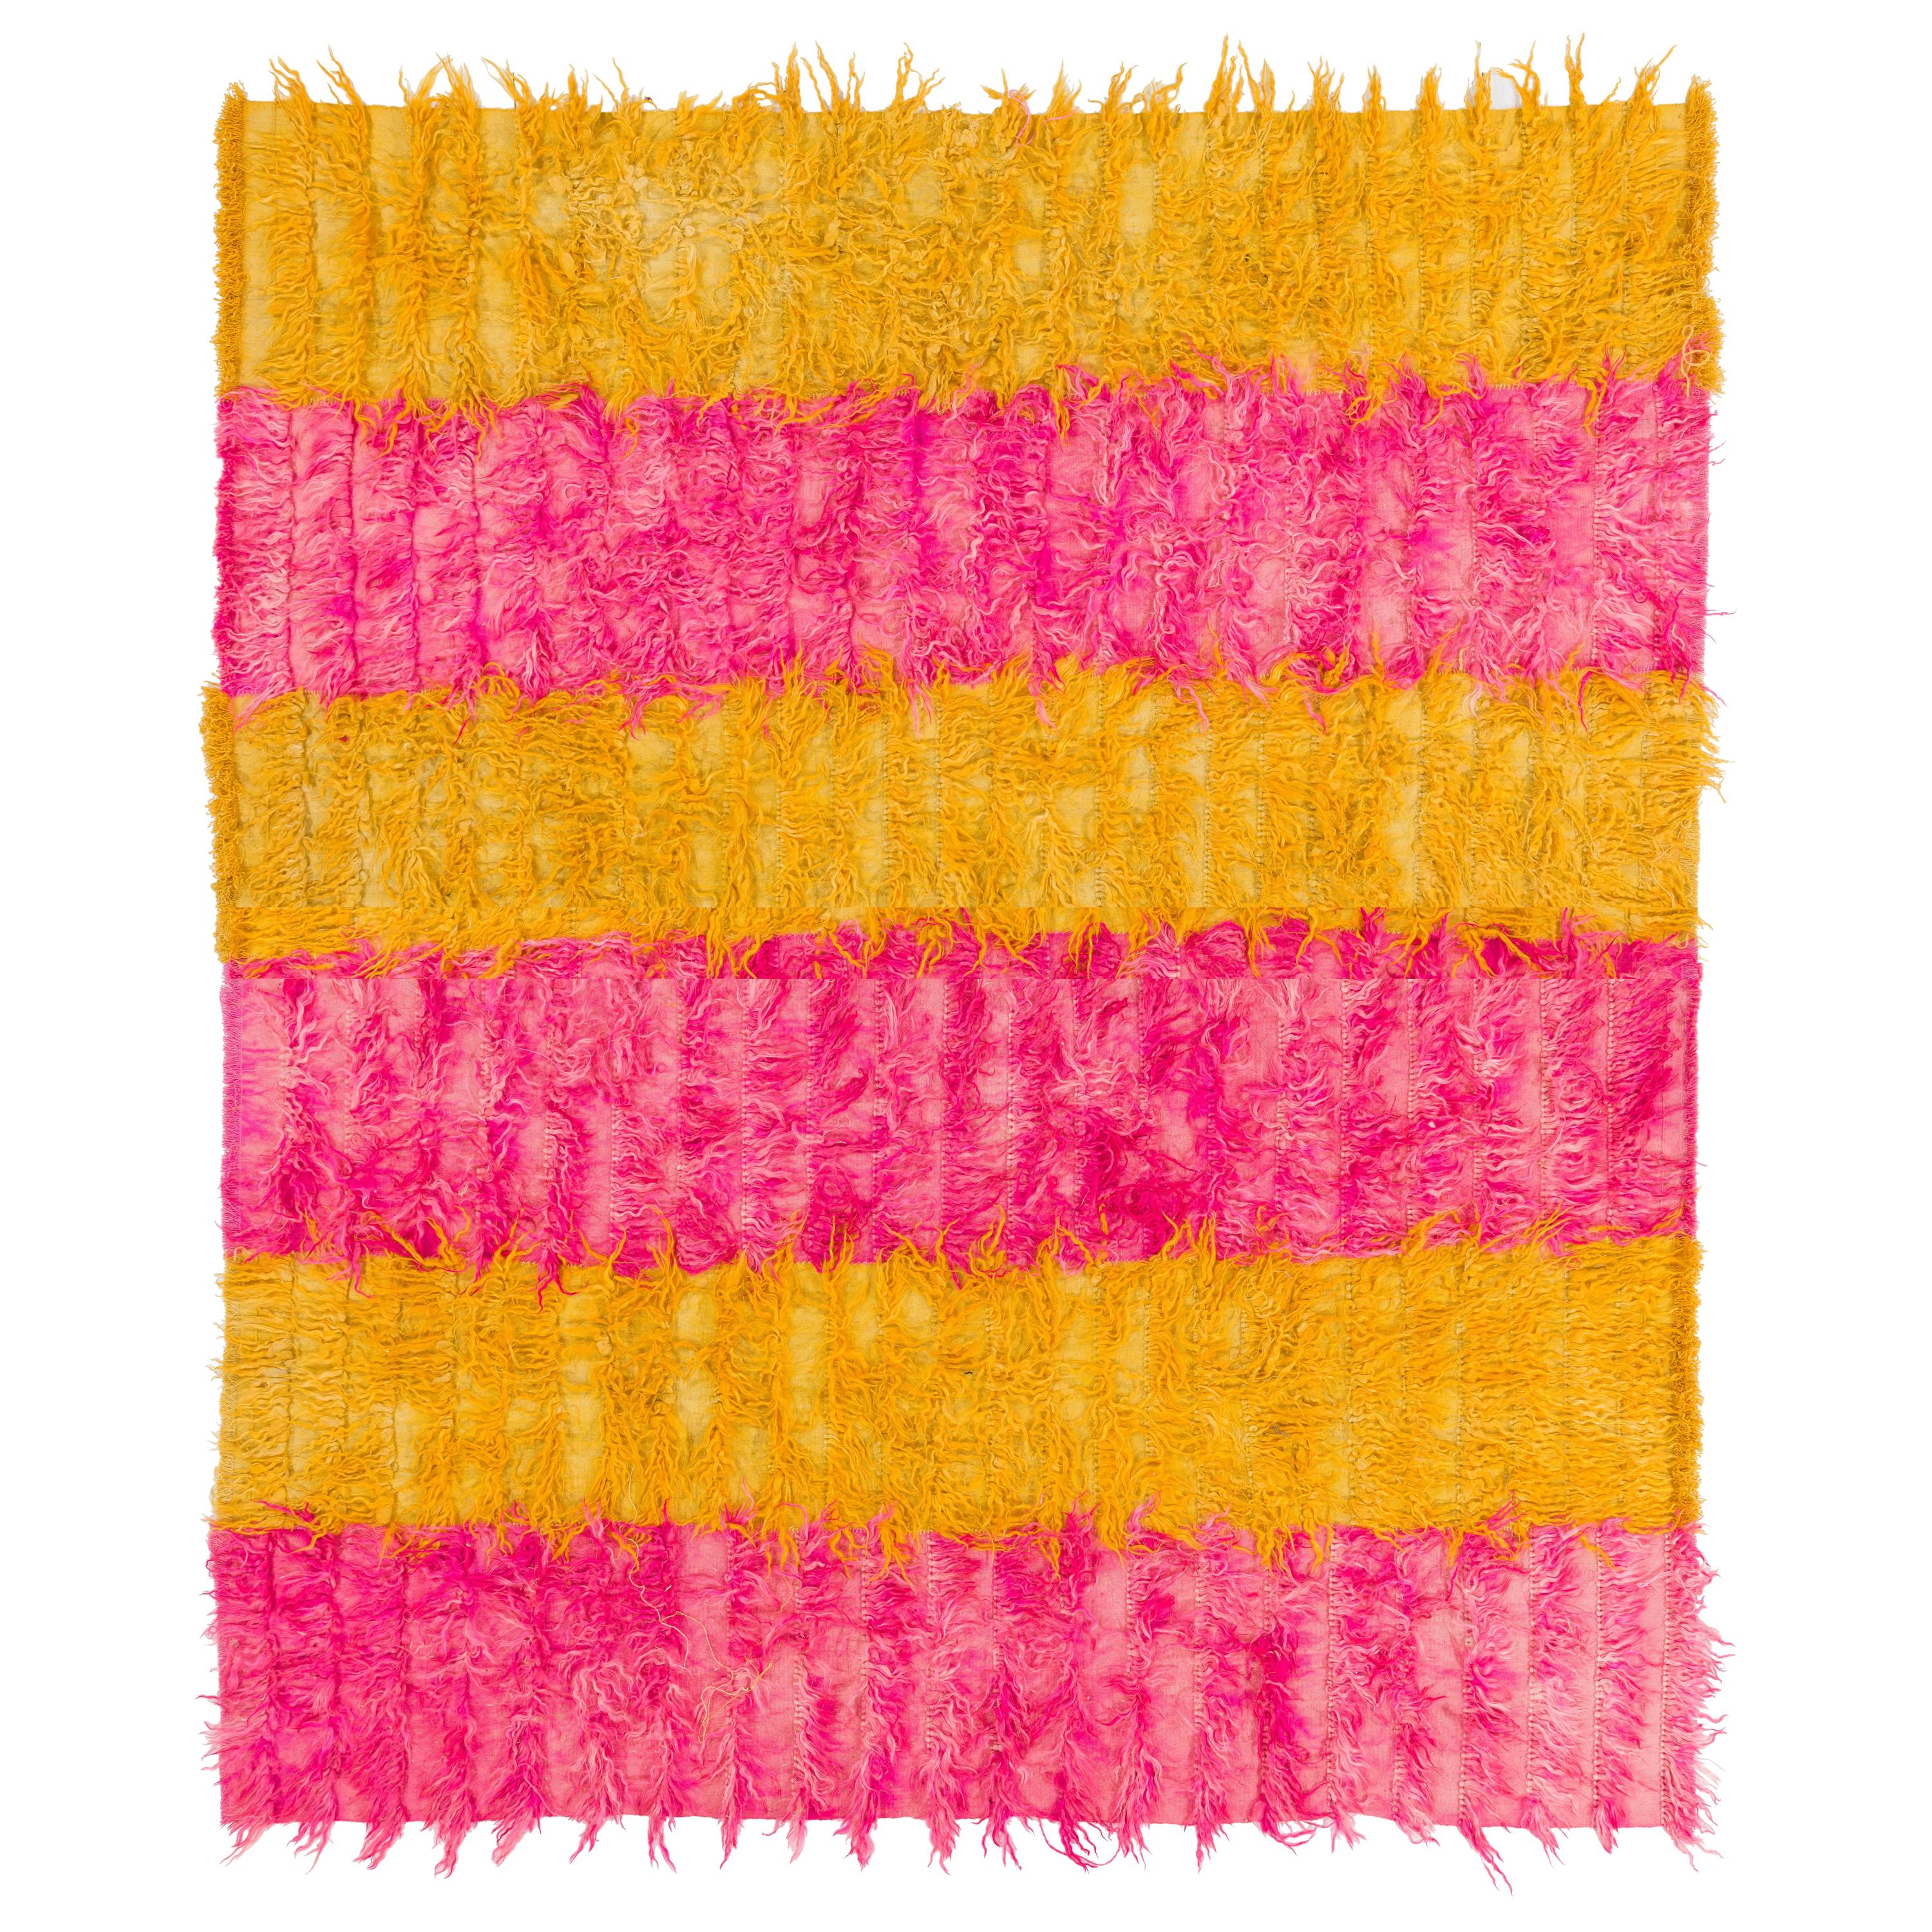 8x10 Ft Vintage Pink & Yellow Shag Pile Rug, 100% Wool. Custom Options Available For Sale